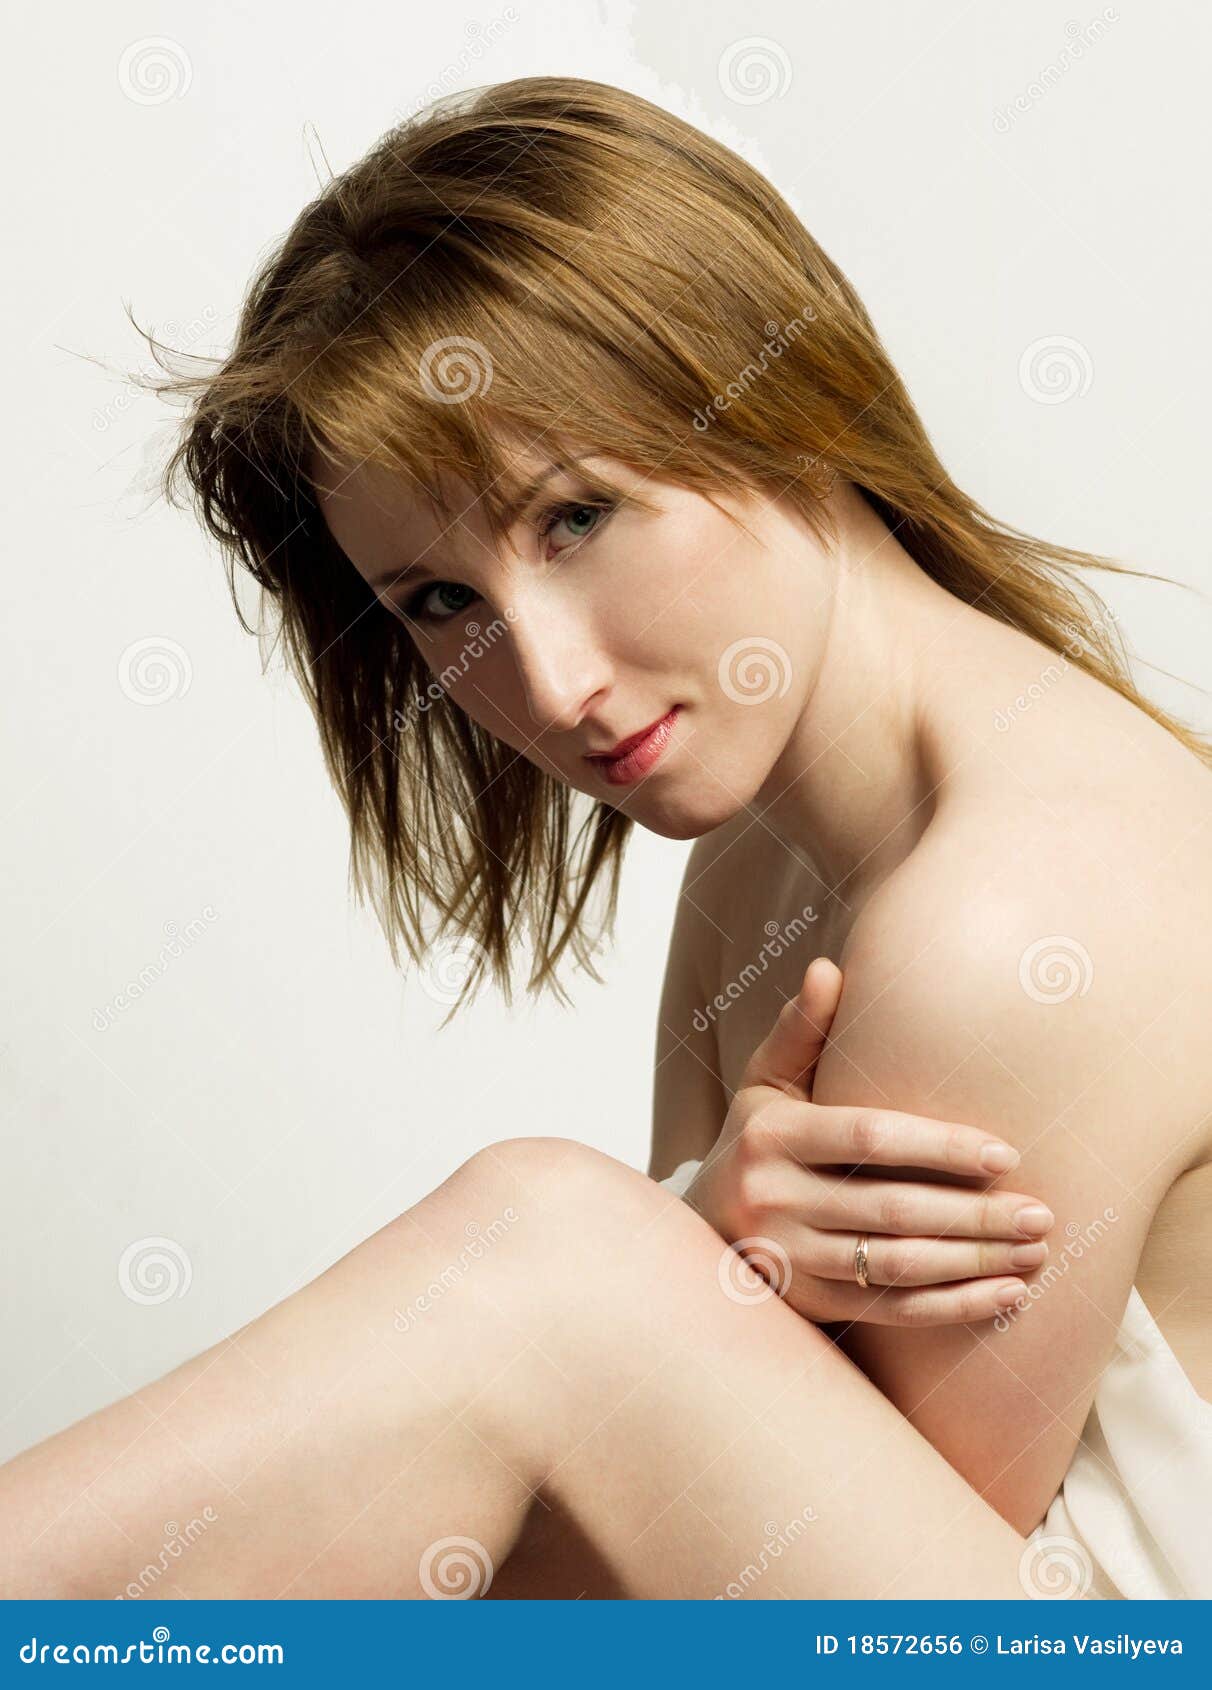 Young Naked Woman Picture photo photo